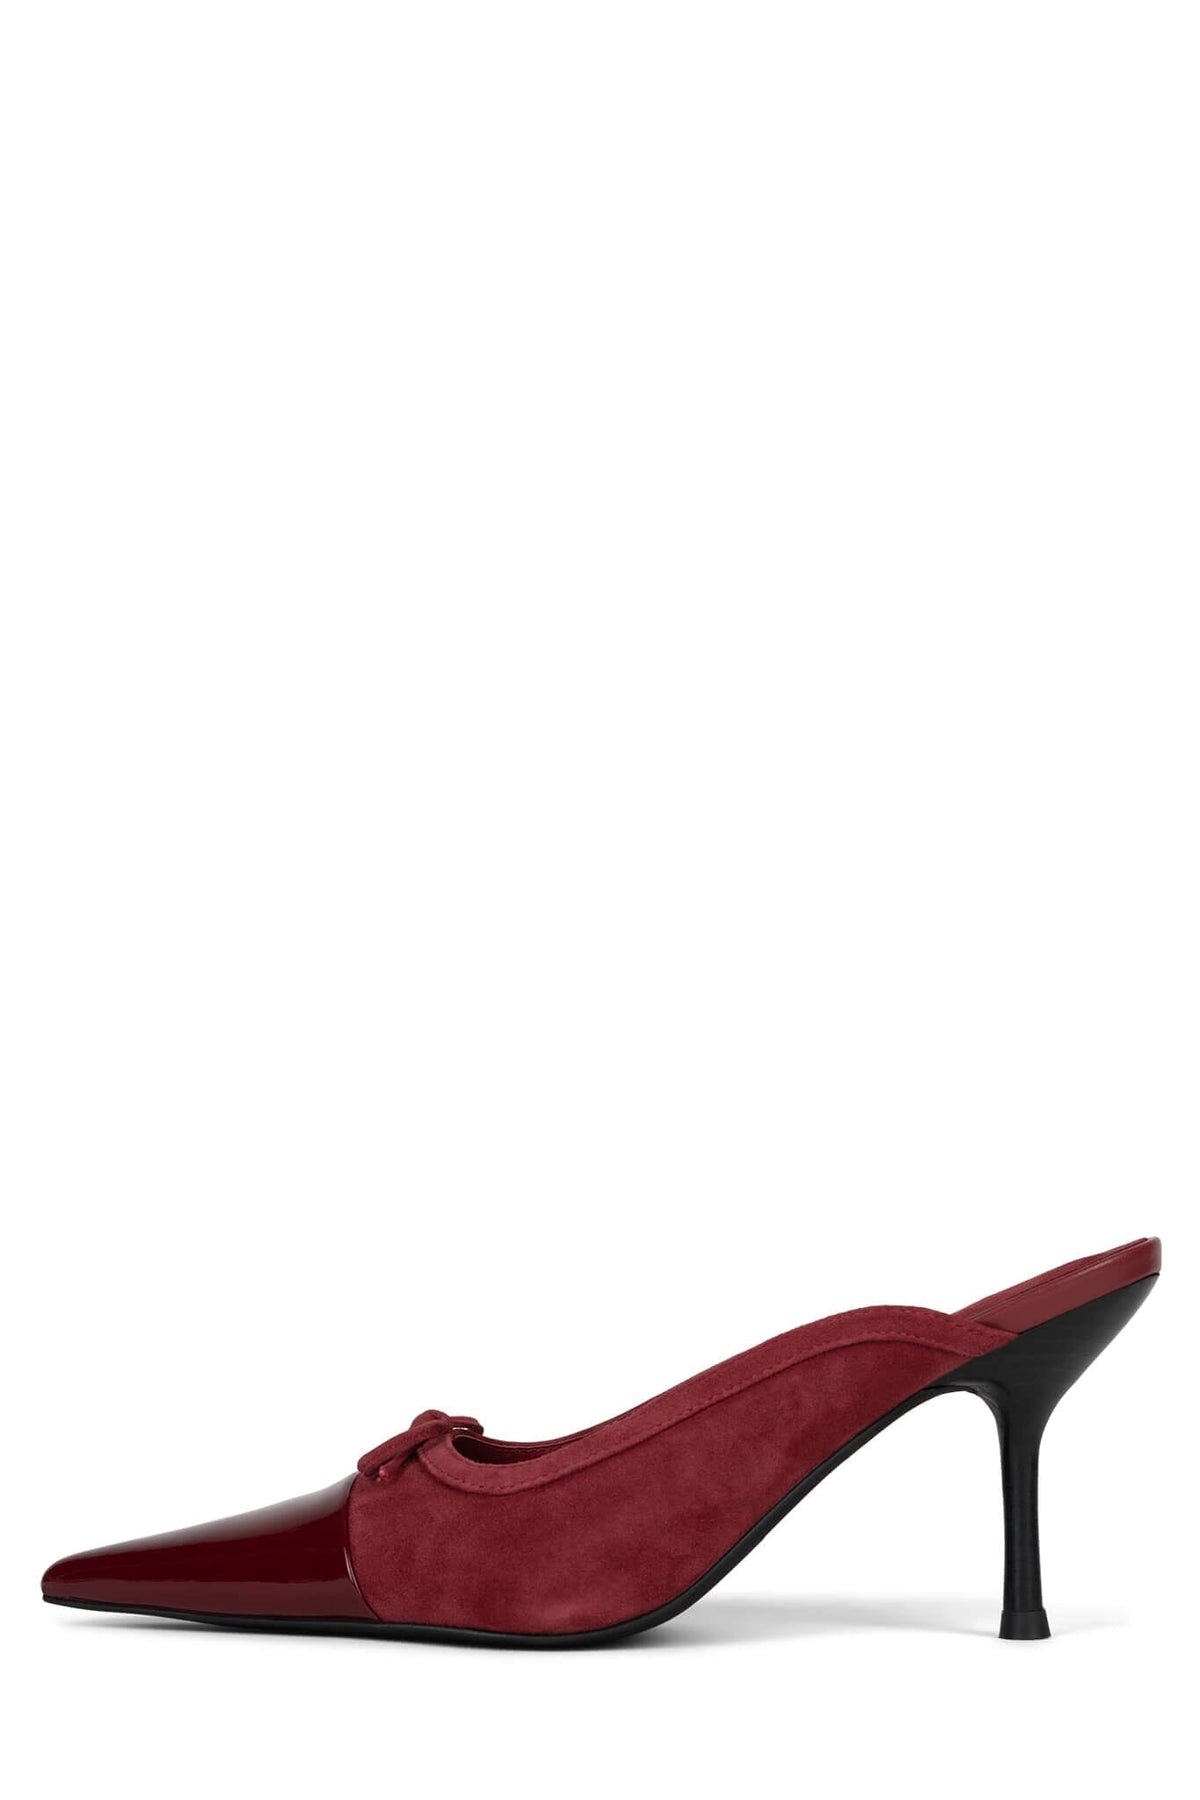 CHOPINE-2 Heeled Mule ST Red Combo 6 